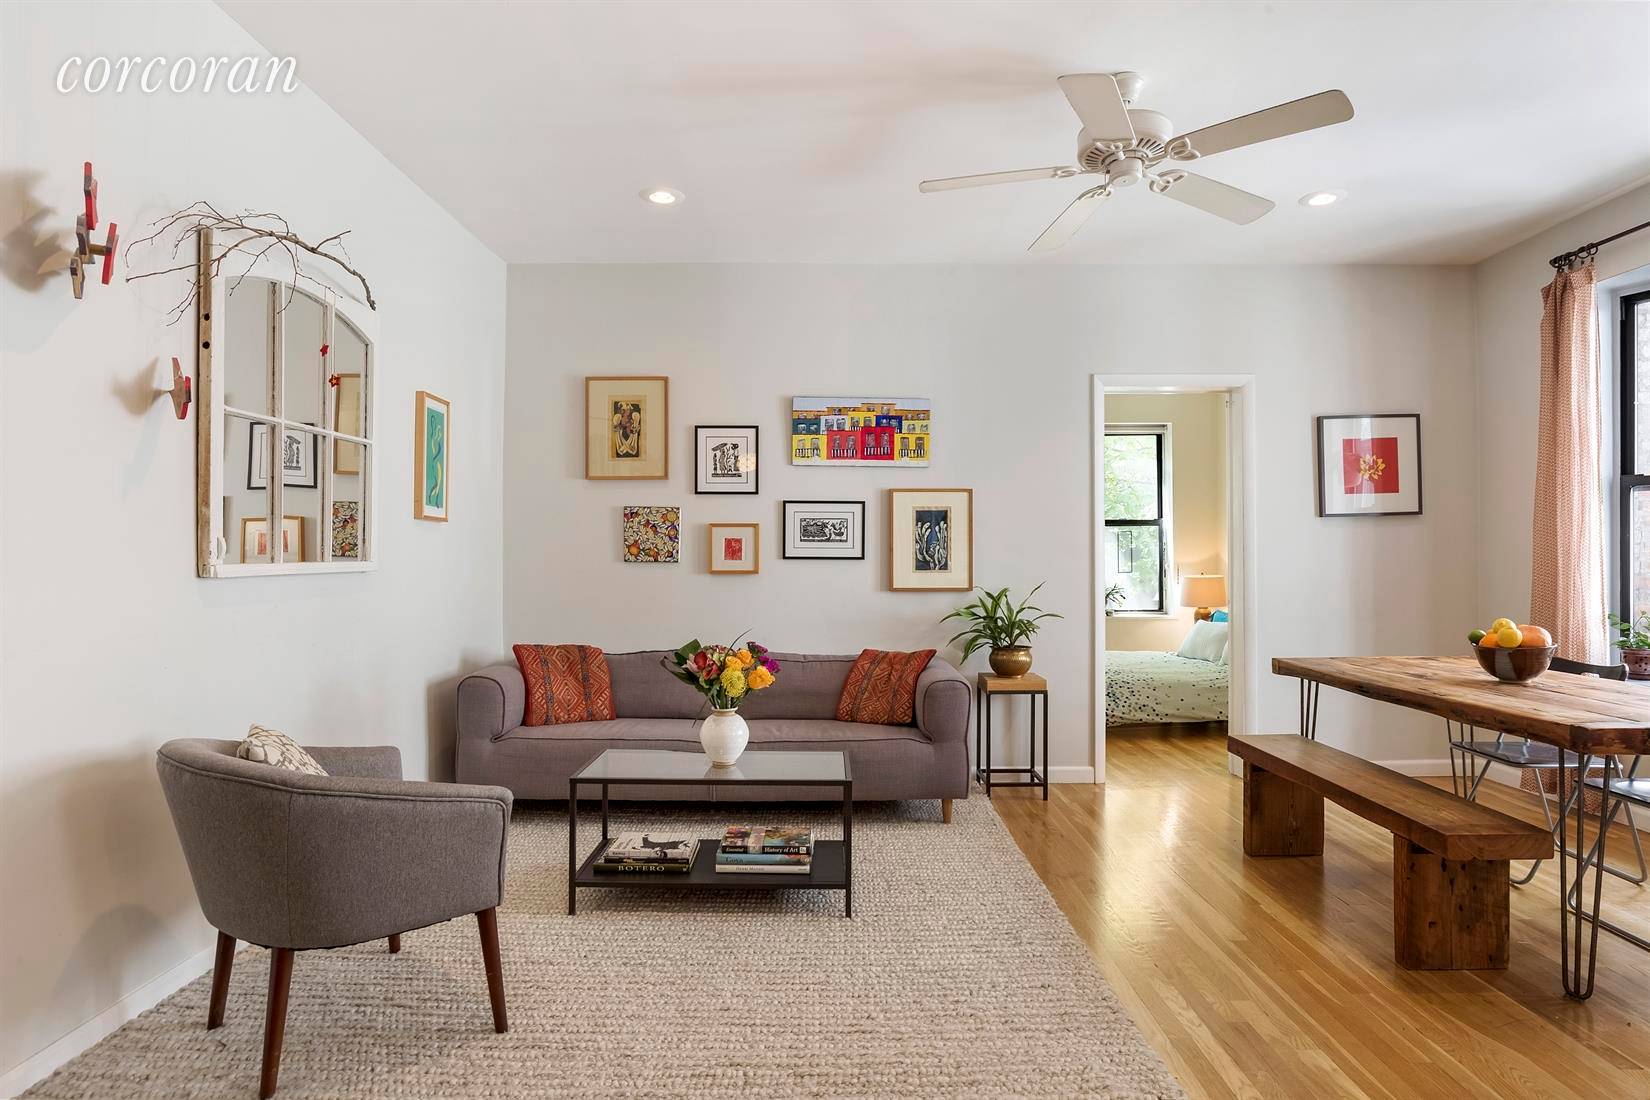 This beautiful, spacious 3 bedroom 1 bath coop is located in a well maintained, pet friendly limestone coop building in prime Prospect Heights on leafy landmarked Sterling Place.